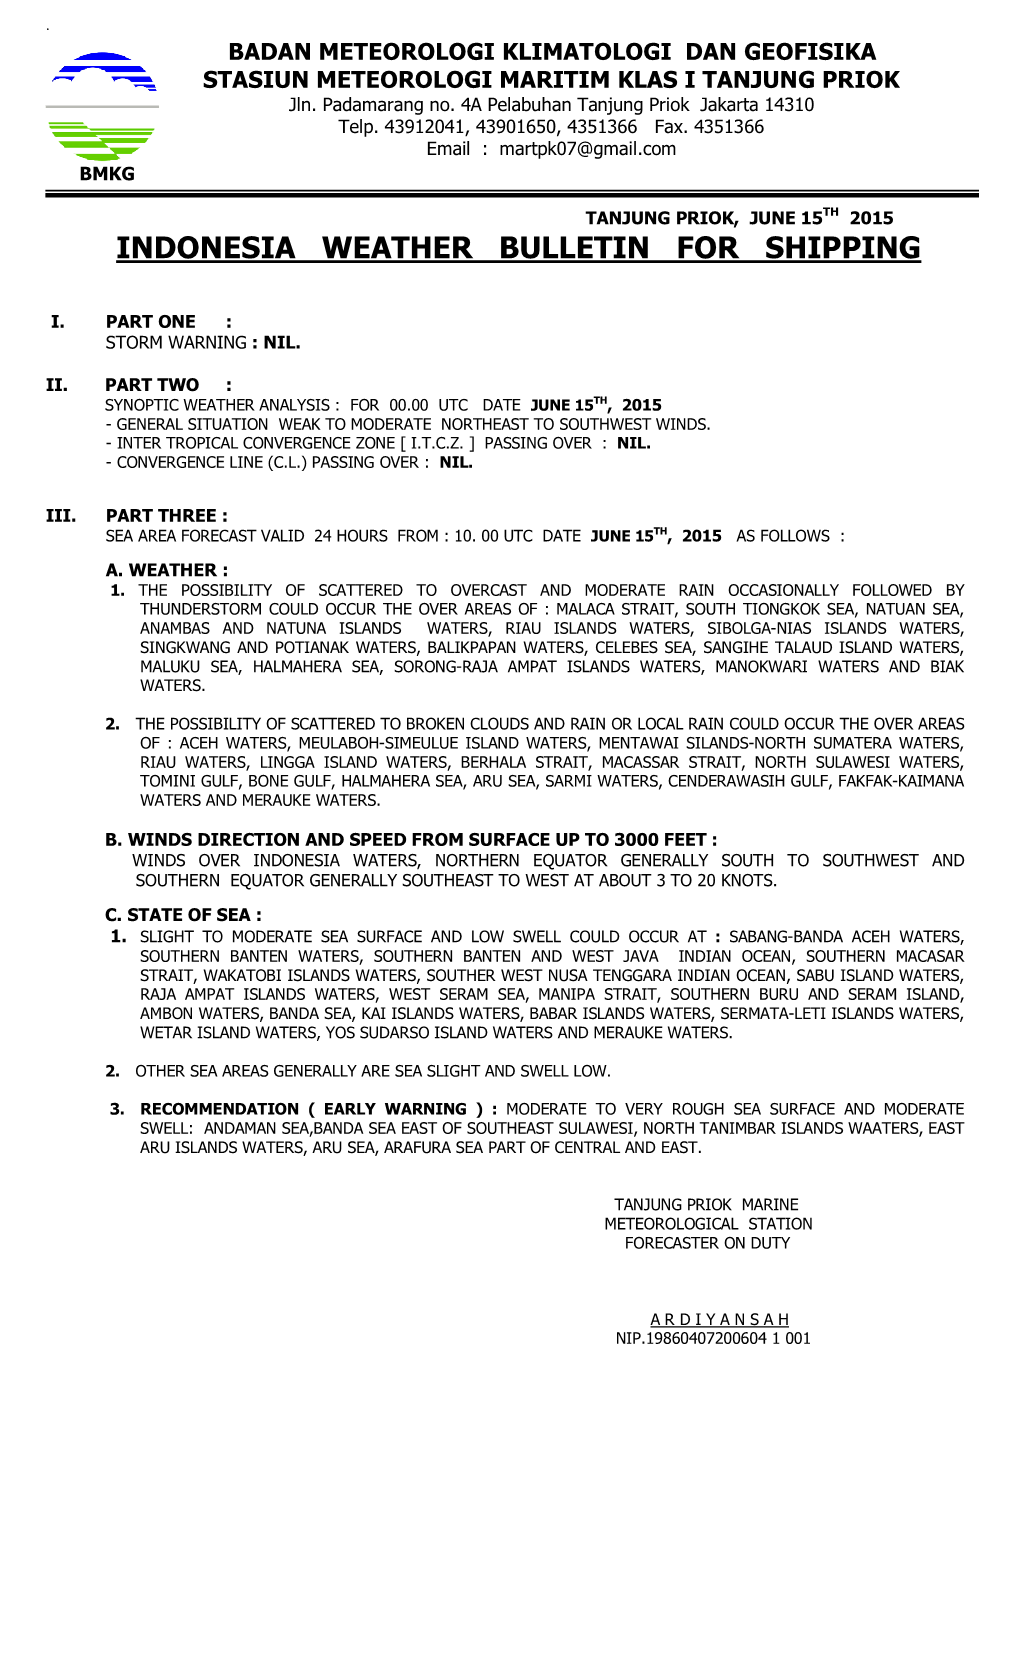 Indonesia Weather Bulletin for Shipping